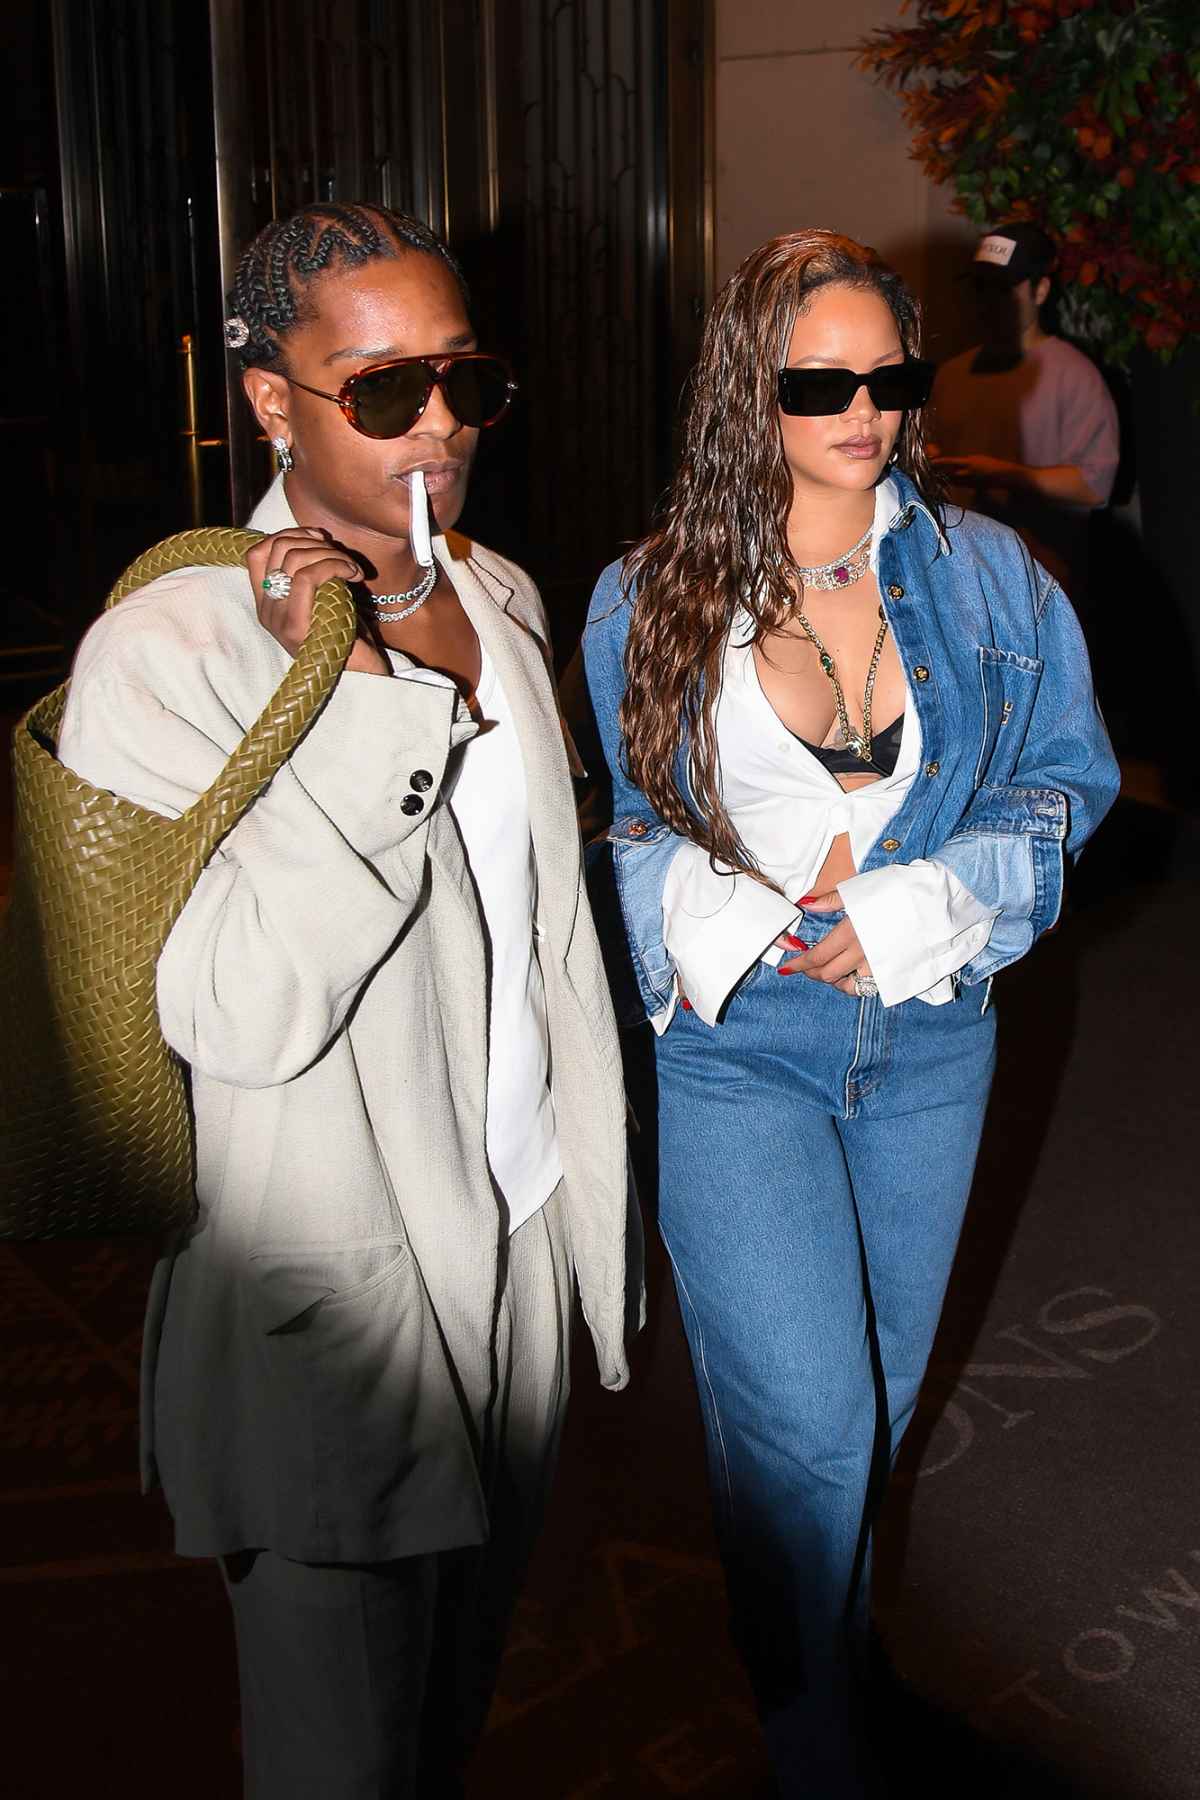 Rihanna Rocks Double Denim Like Only She Can on Date With ASAP Rocky ...